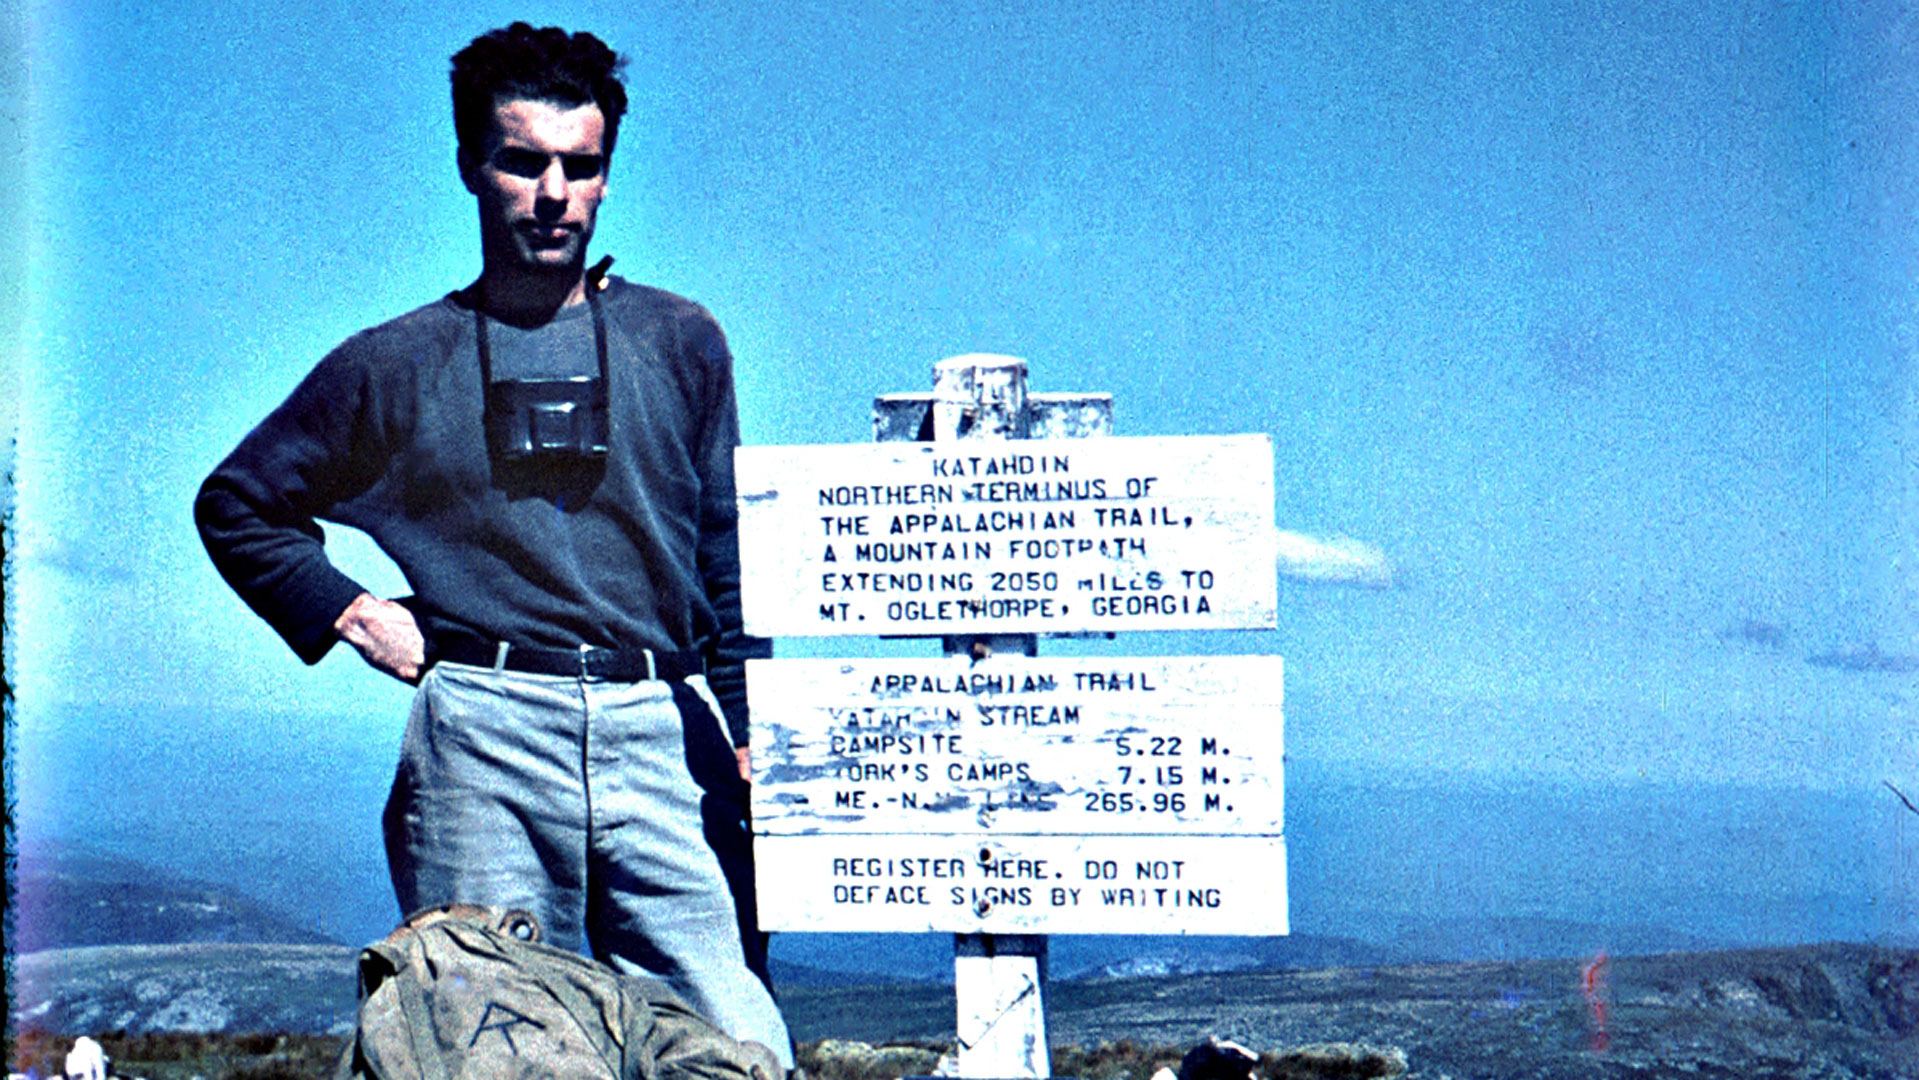 World War II veteran Earl Shaffer stands on the summit of Katahdin at the end of his 1948 thru-hike, becoming the first known A.T. thru-hiker.